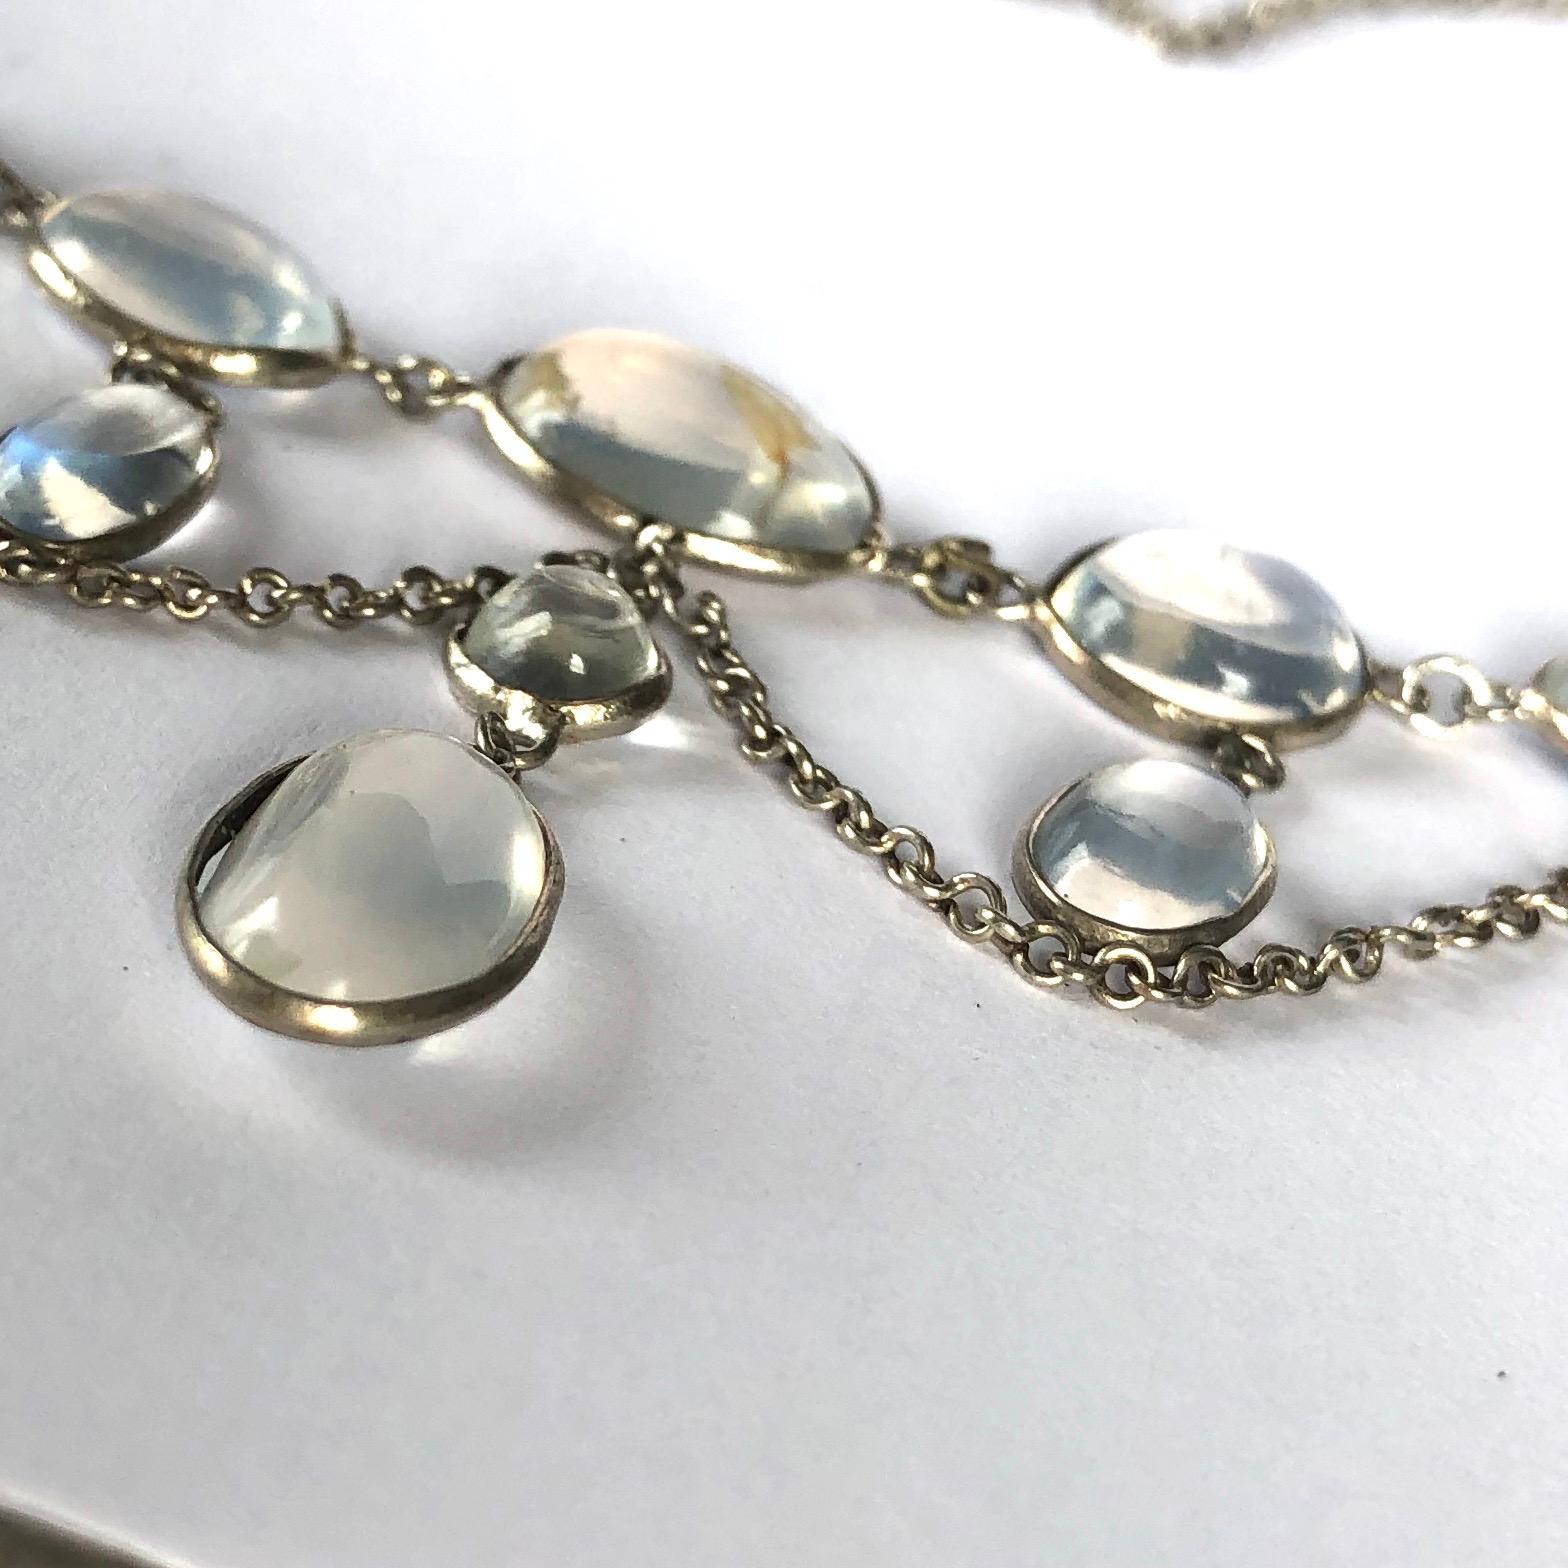 An exquisite Edwardian festoon necklace. The chain is set with oval moonstone cabochons and small drops within the elegant swags.

Chain Length: 36.5cm
Drop Length: 37mm

Weight: 6.8g